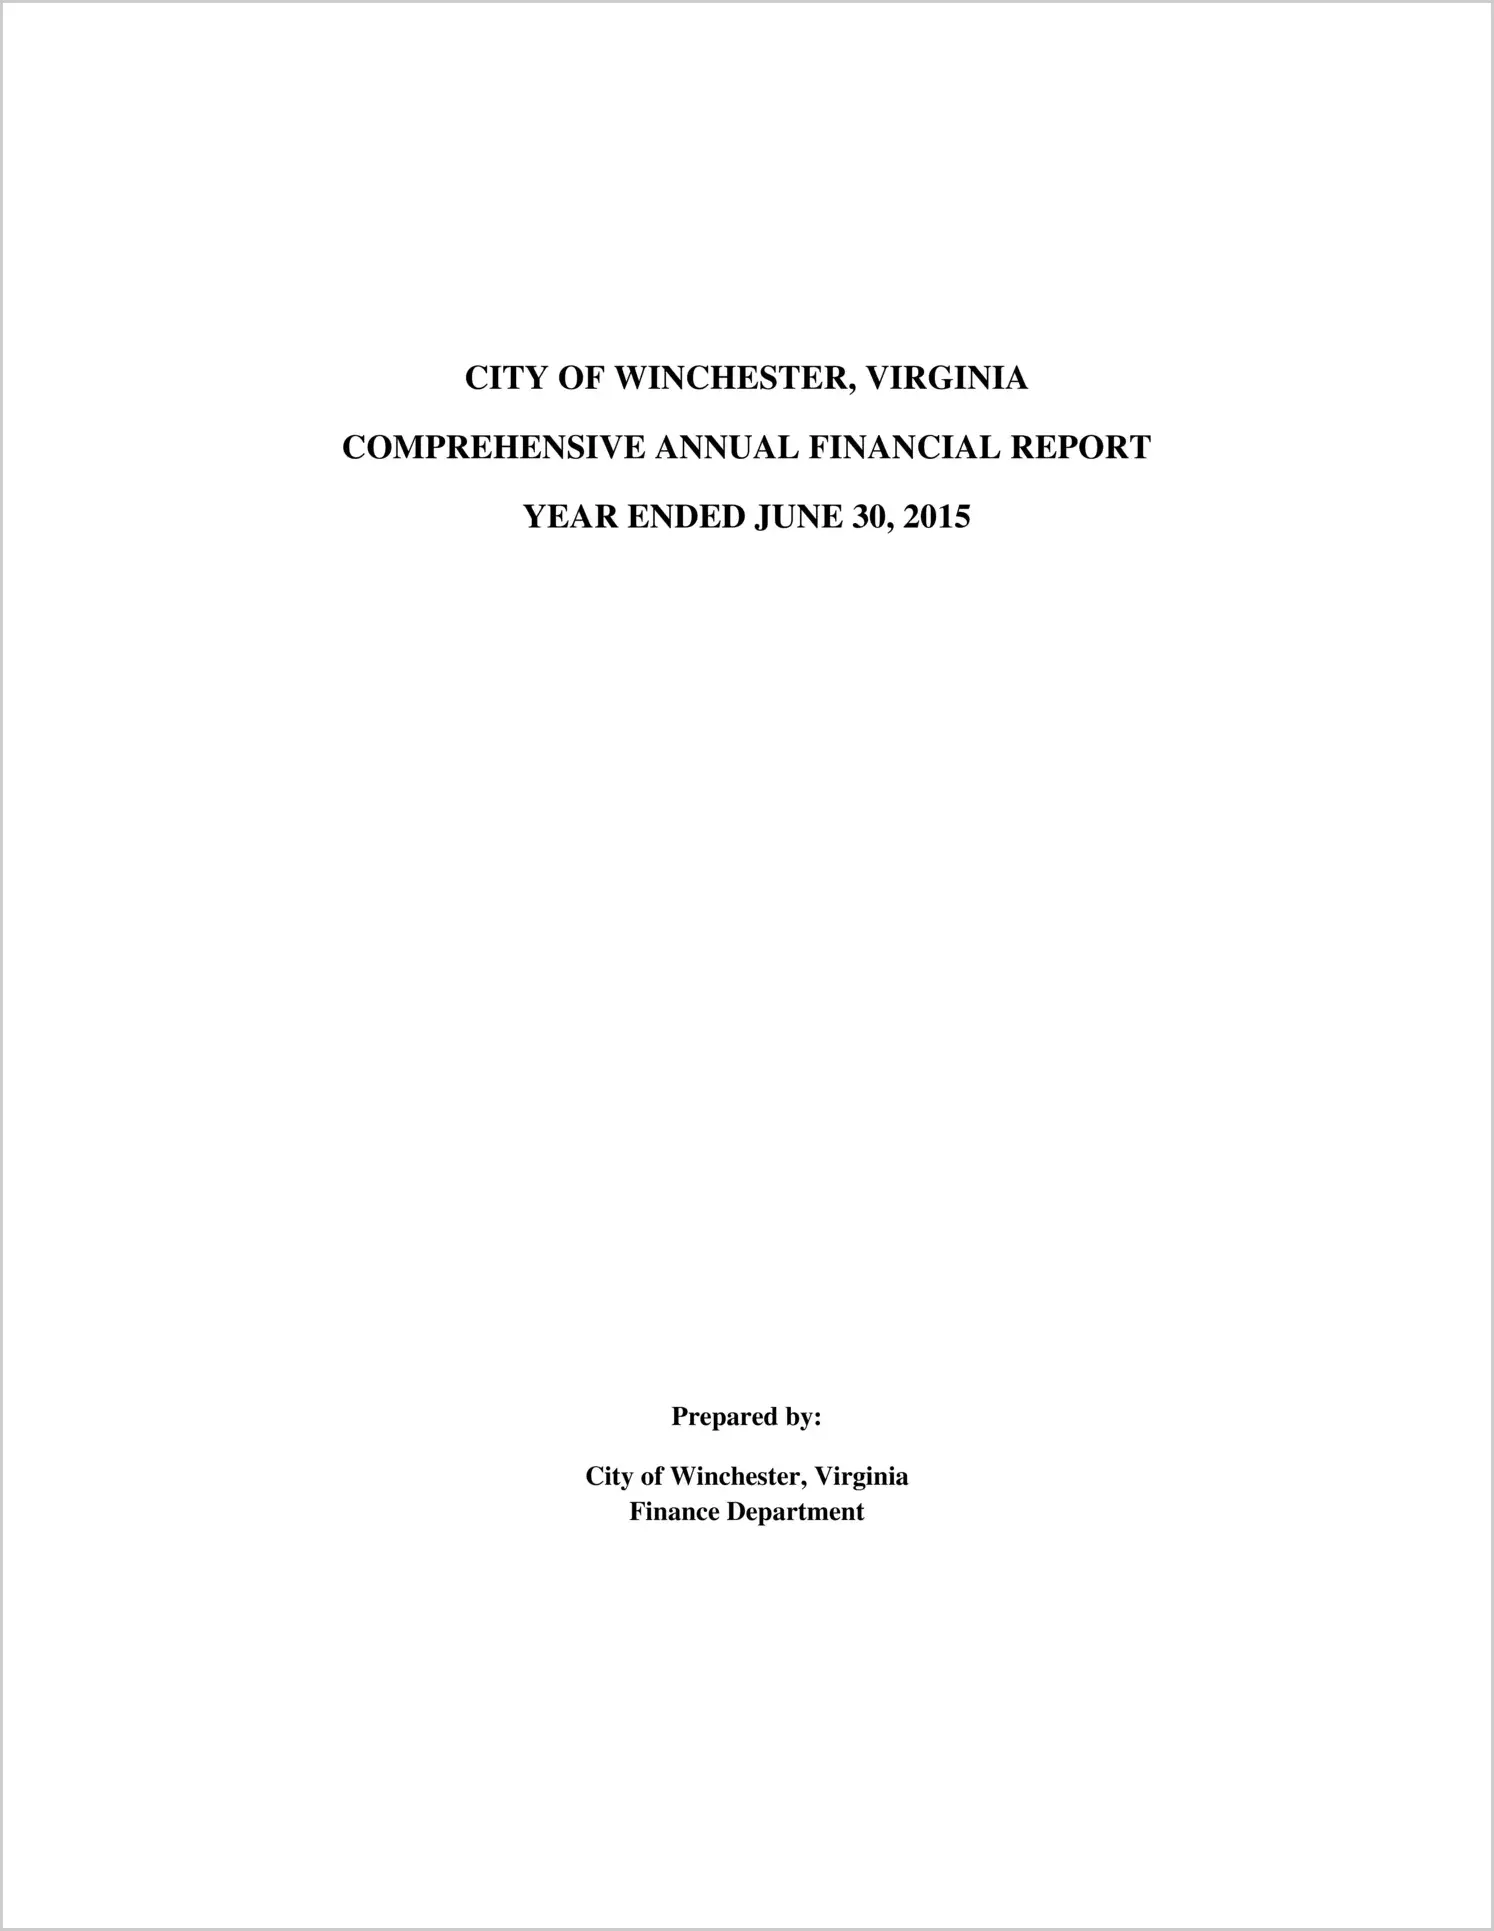 2015 Annual Financial Report for City of Winchester